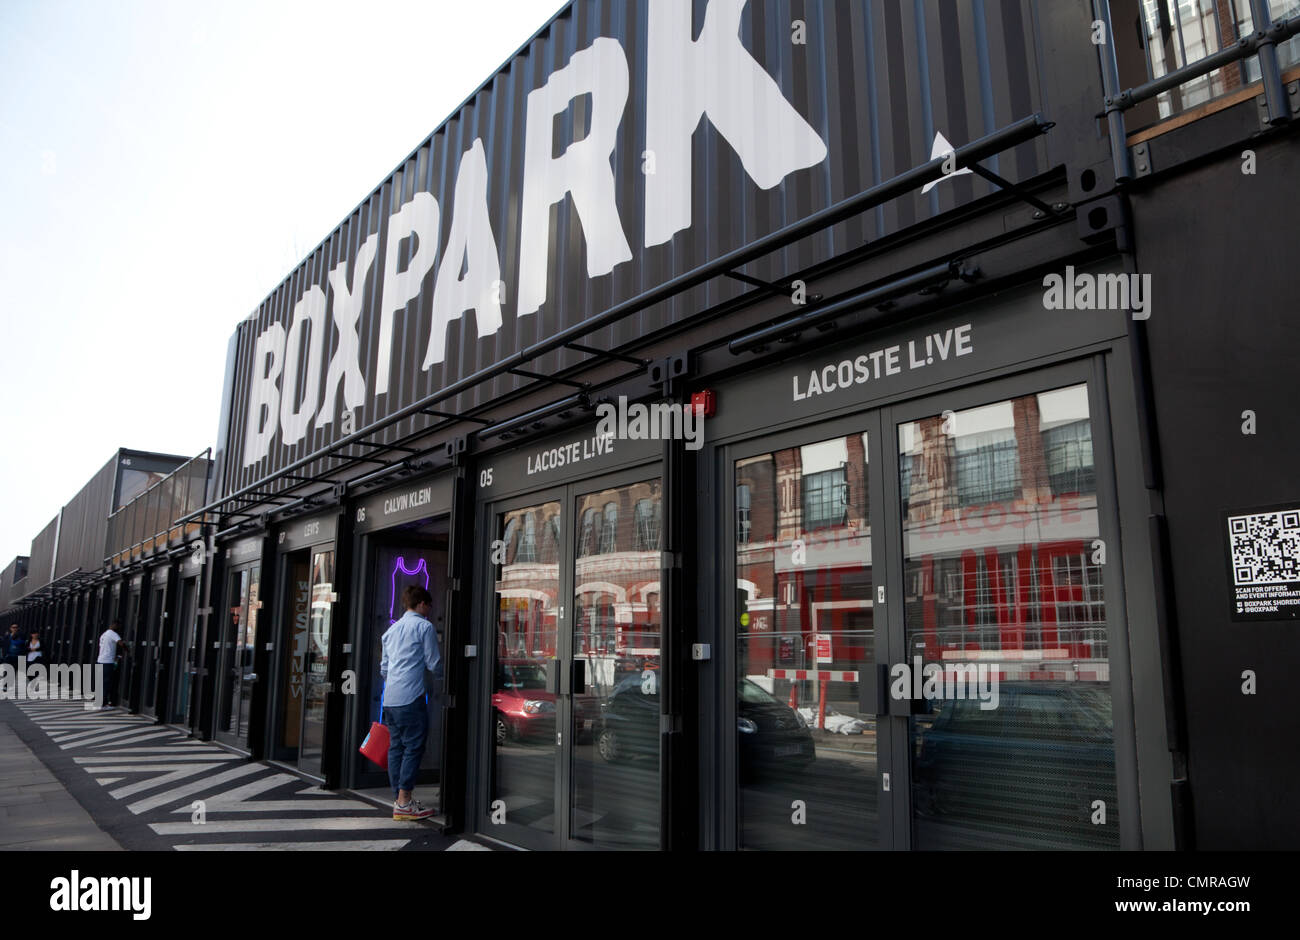 Boxpark-pop up shopping mall, Shoreditch, London Banque D'Images